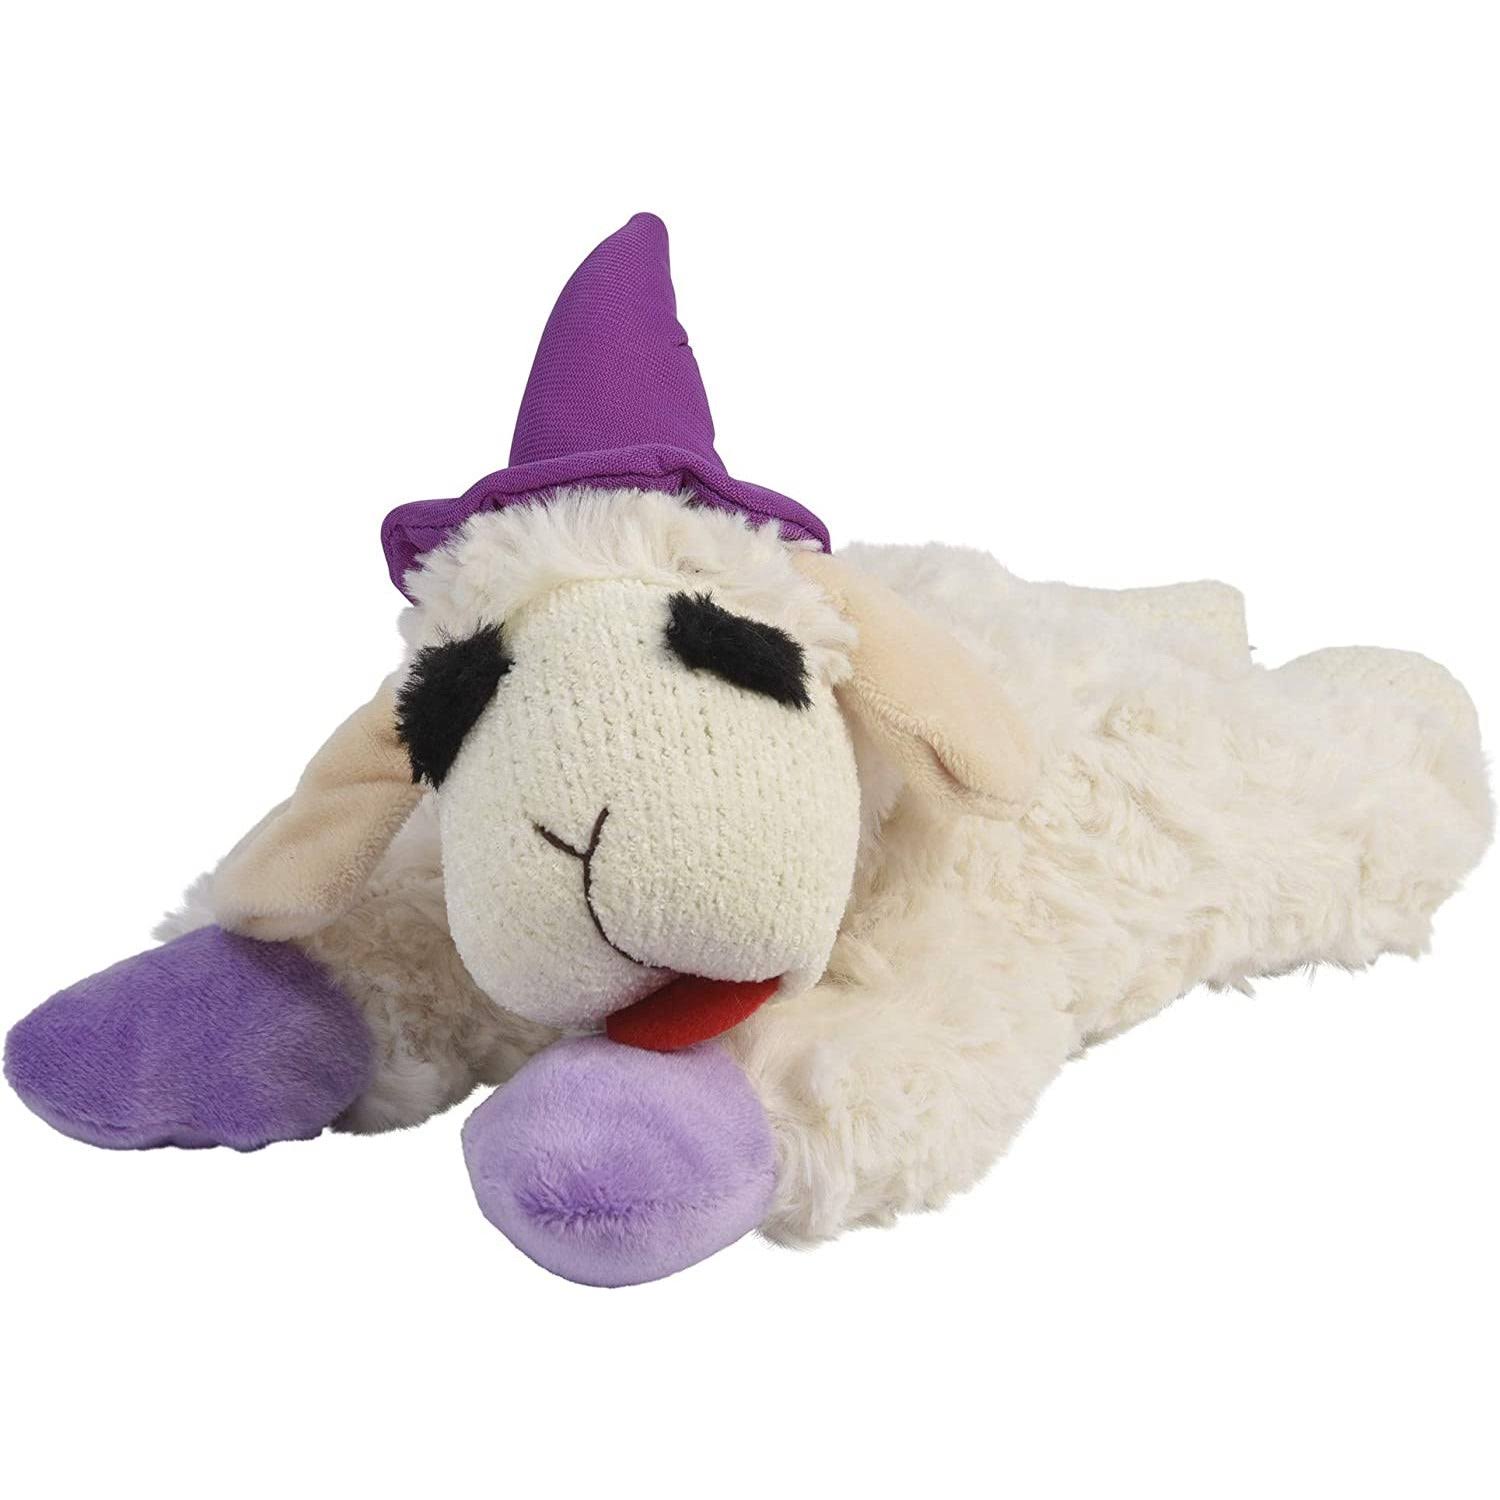 Multipets Halloween Lamb Chop Dog Toy - Purple Witches Hat - One Size